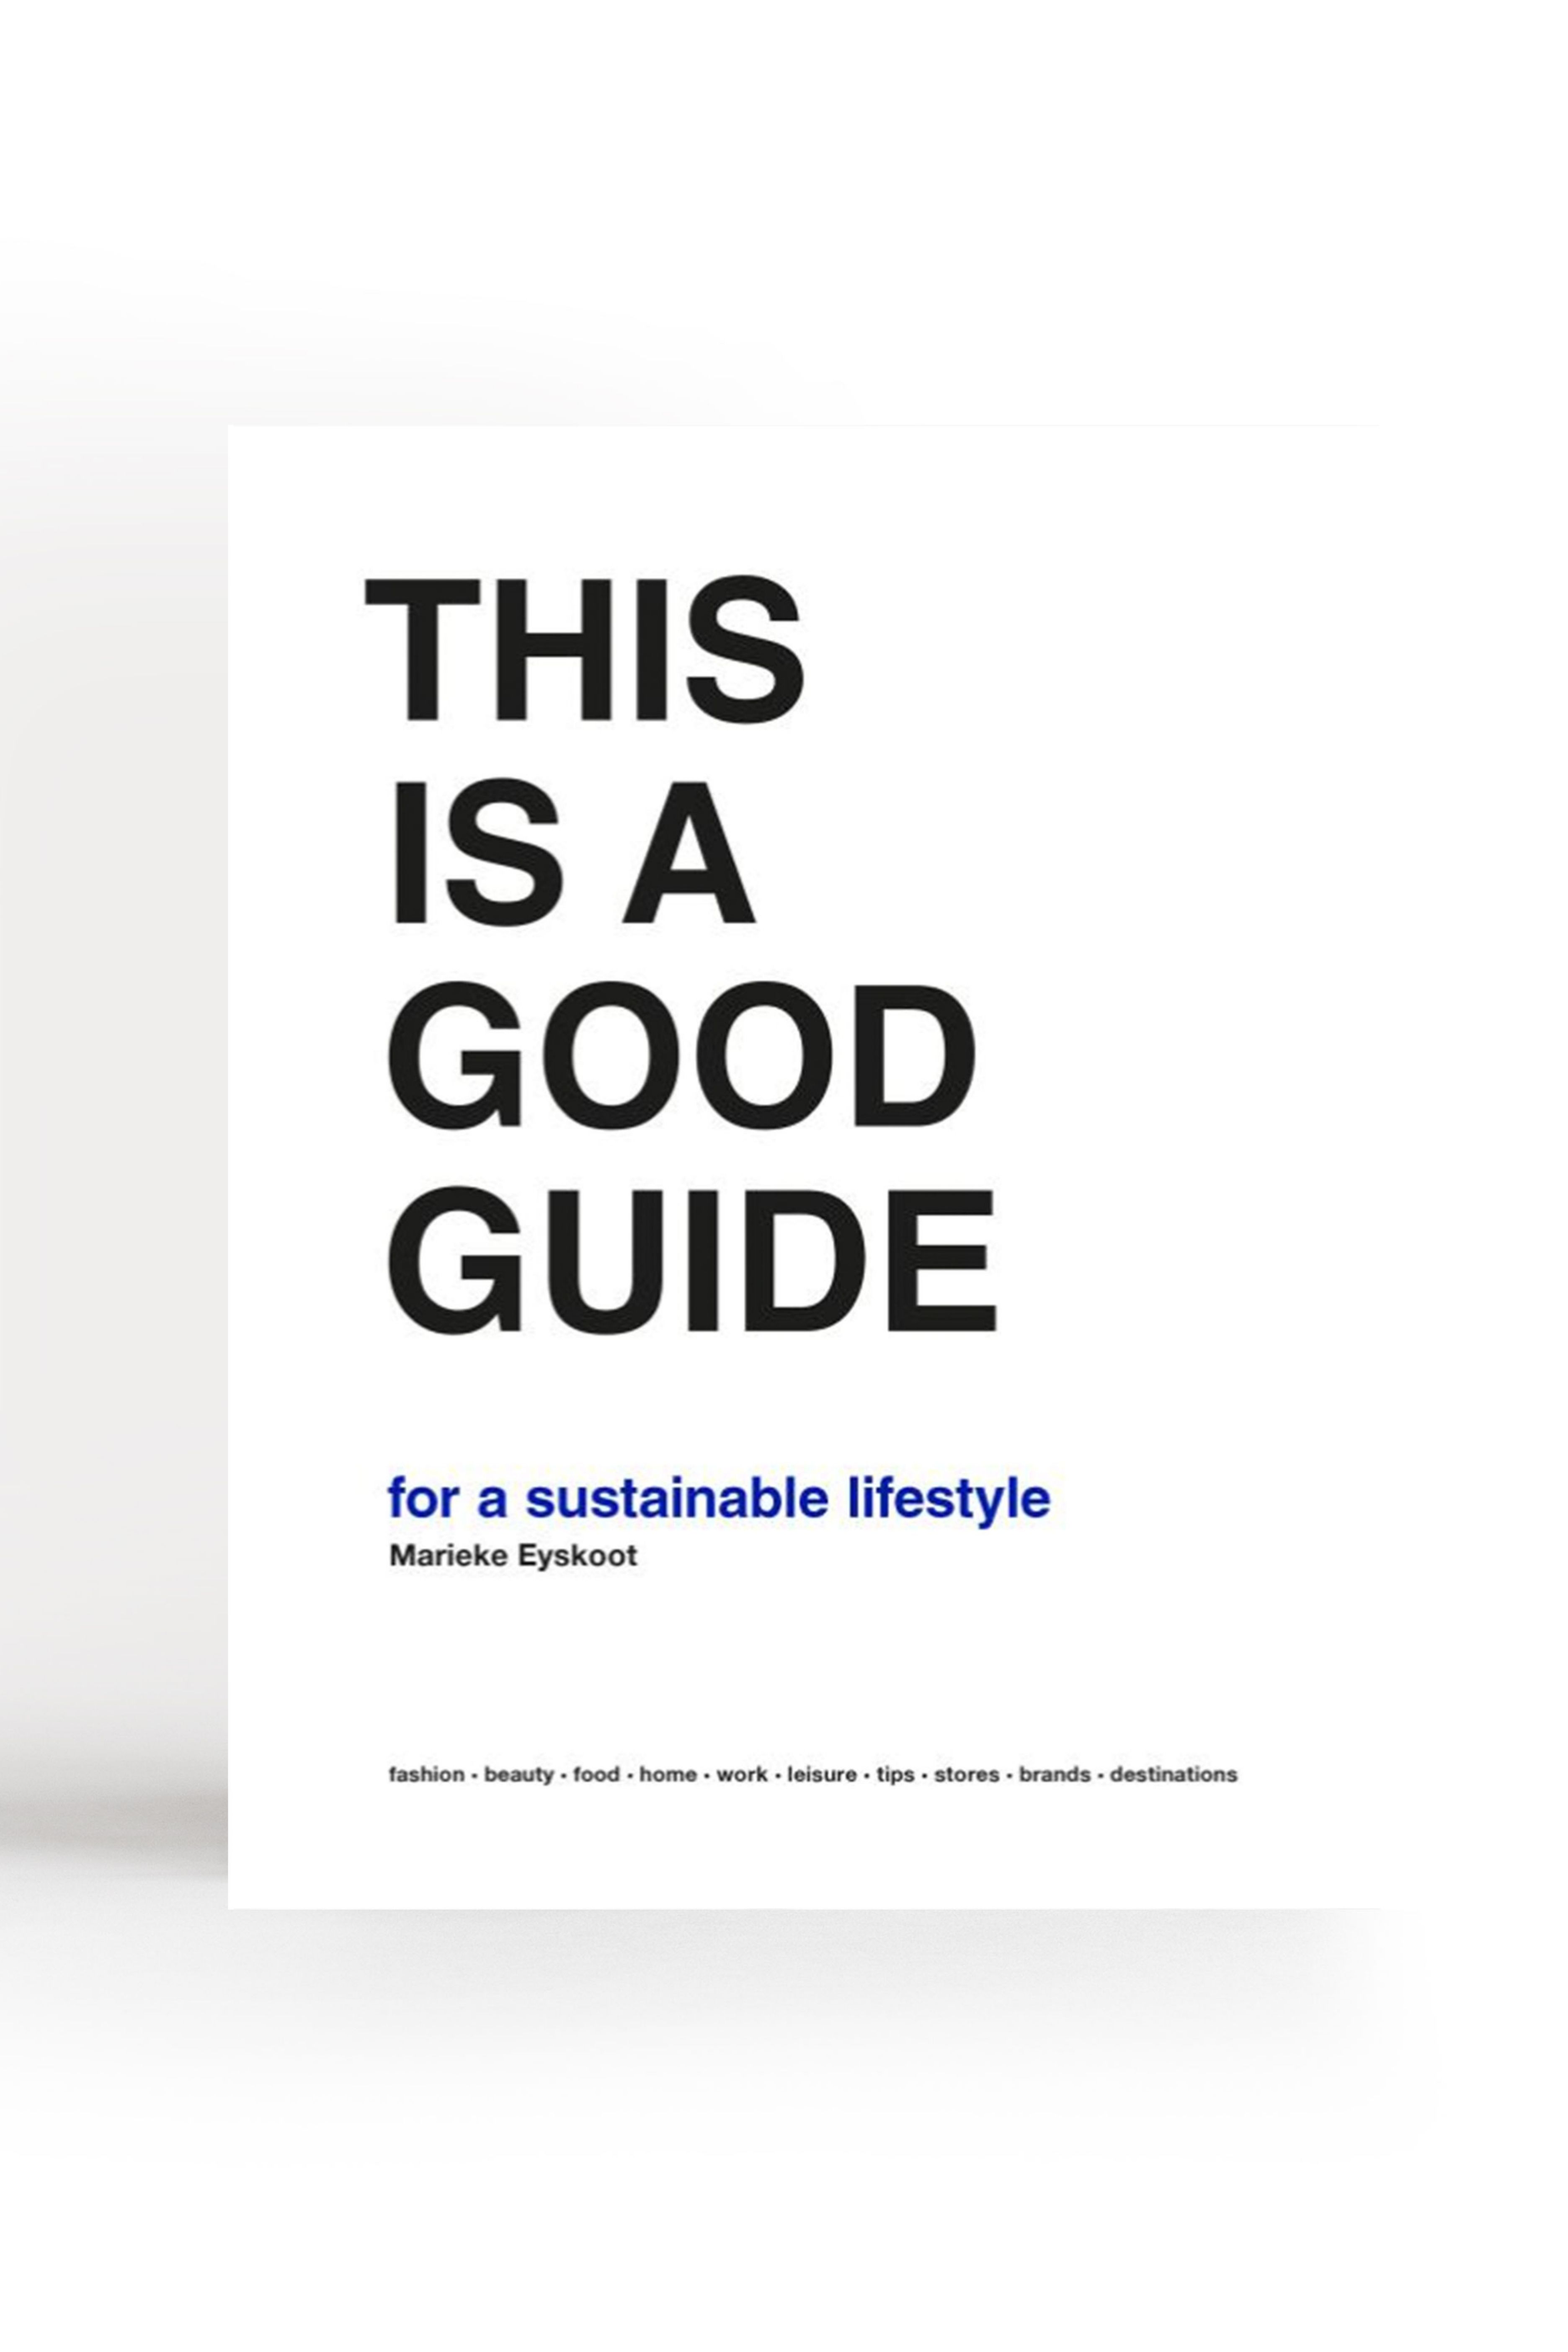 This Is a Good Guide for a Sustainable Lifestyle